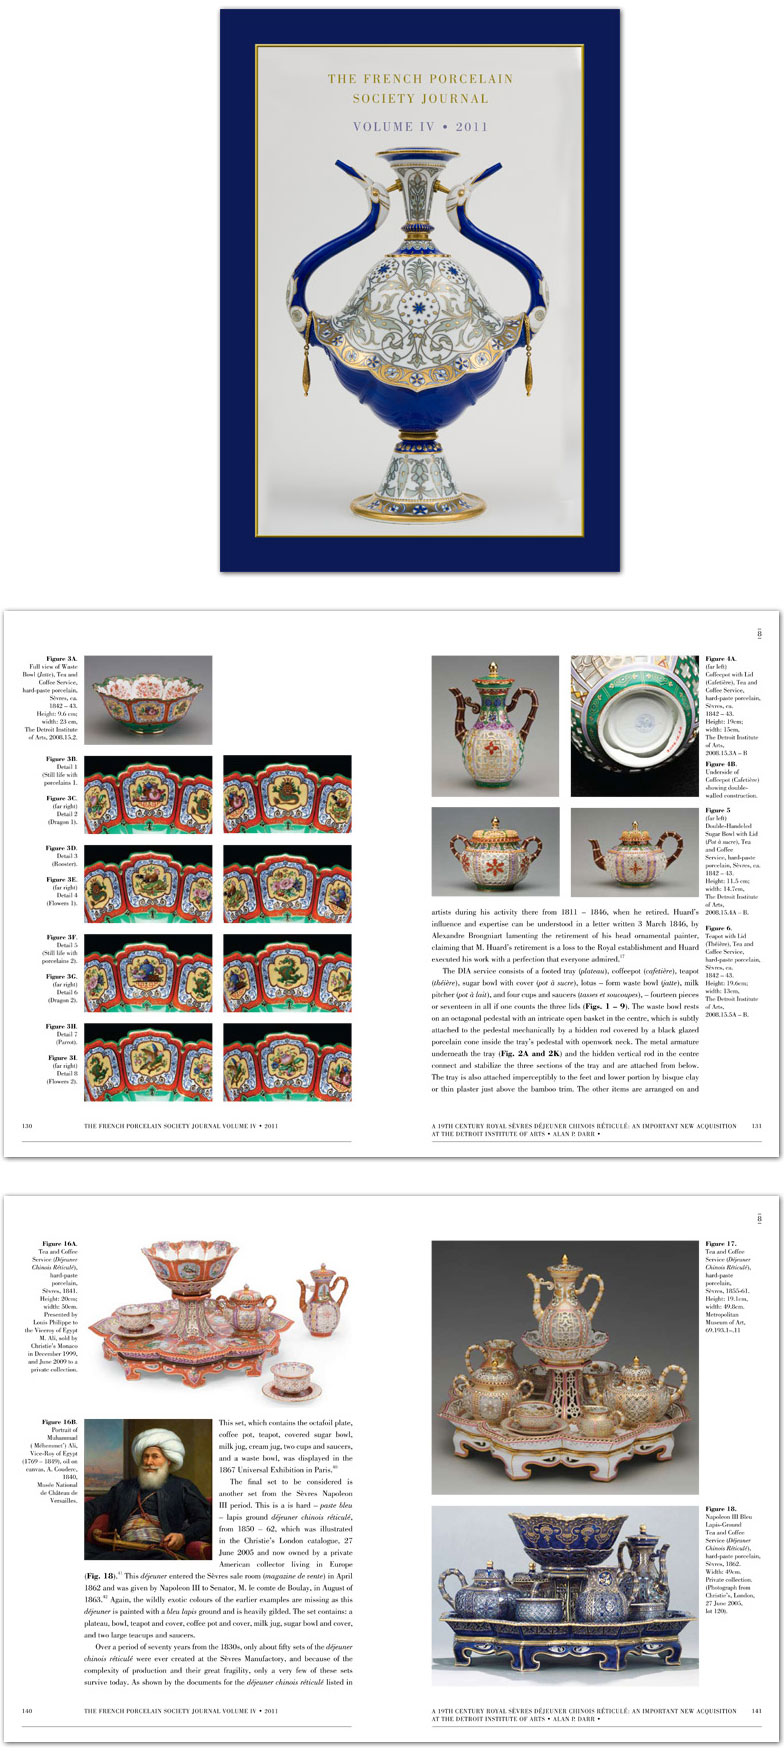 The French Porcelain Society Journal